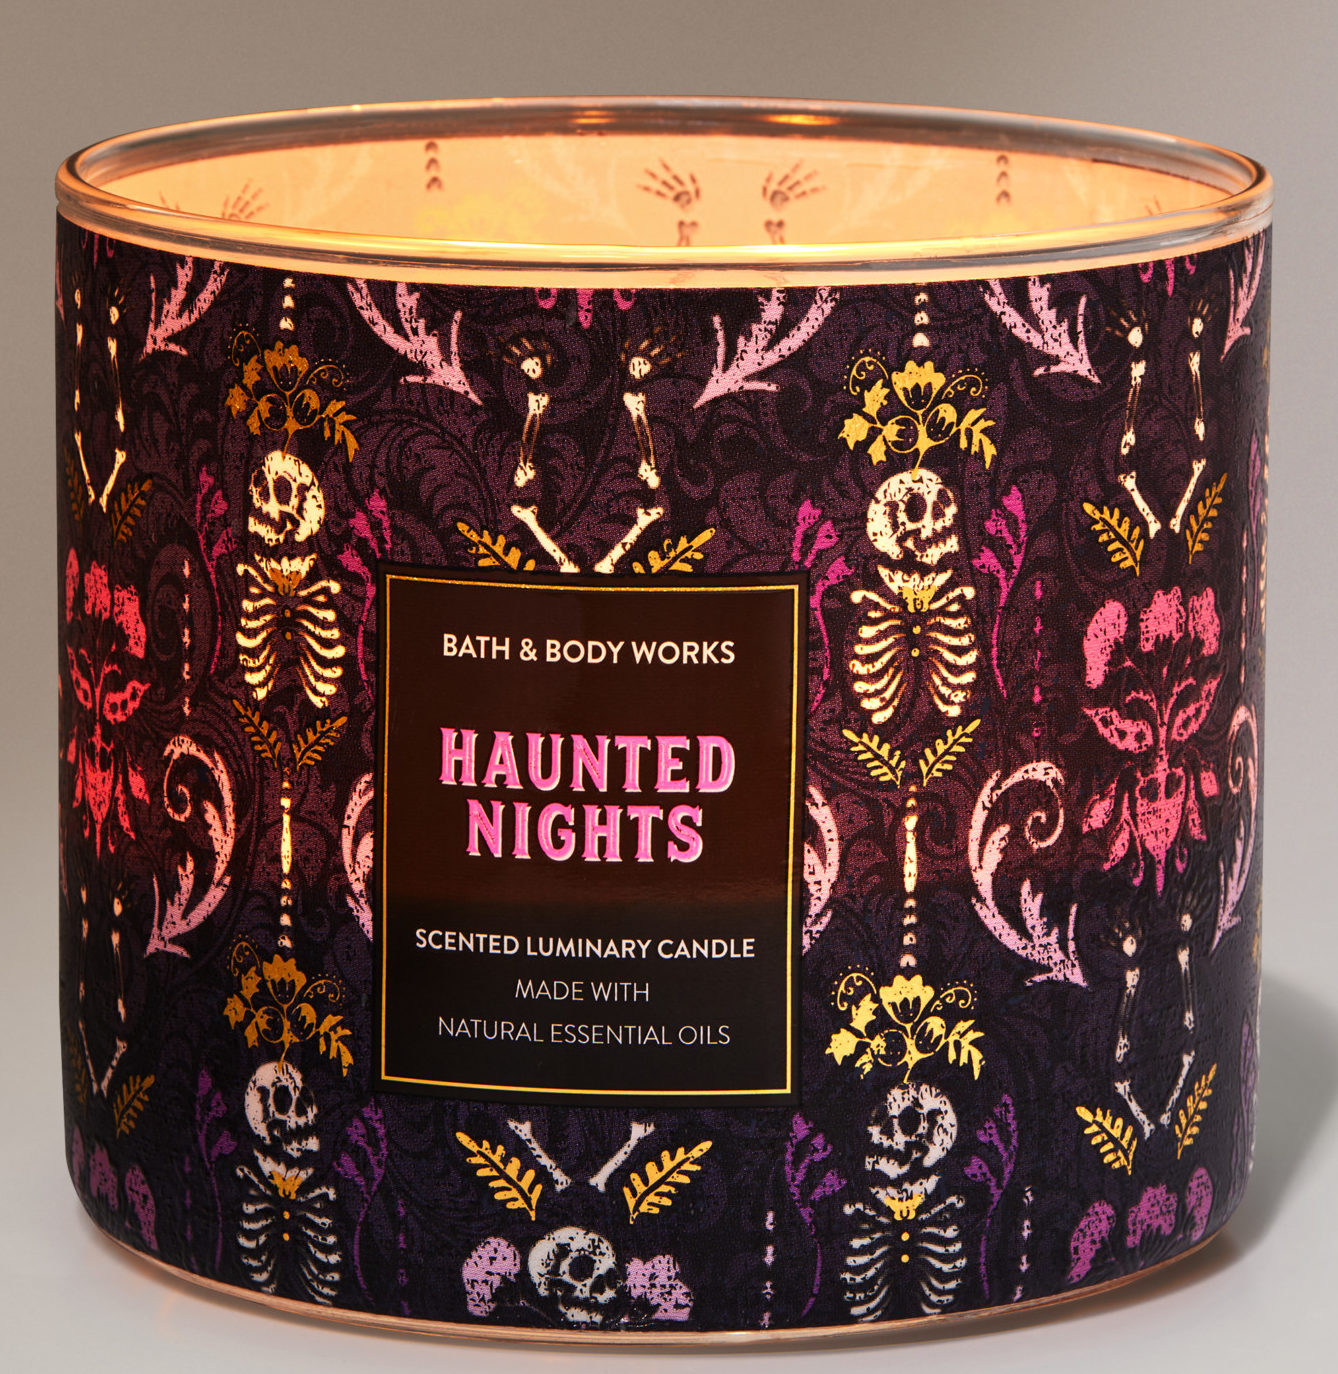 Bath & Body Works Just Dropped Their Halloween Collection